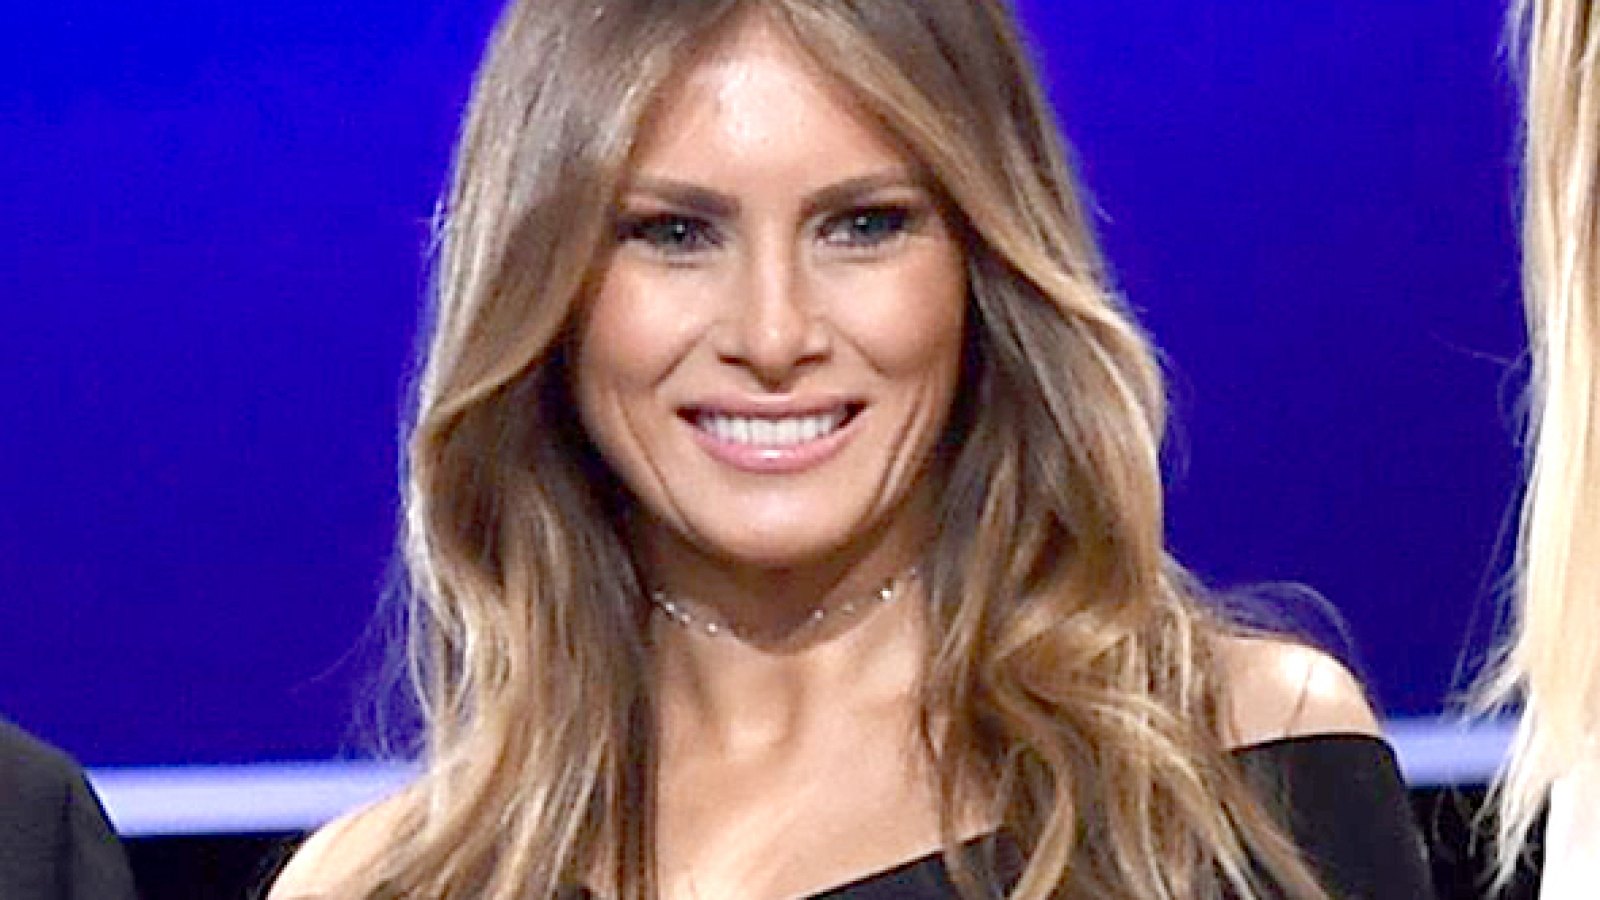 Melania Trump comes on stage at the end of the first presidential debate at Hofstra University in Hempstead, New York on September 26, 2016.